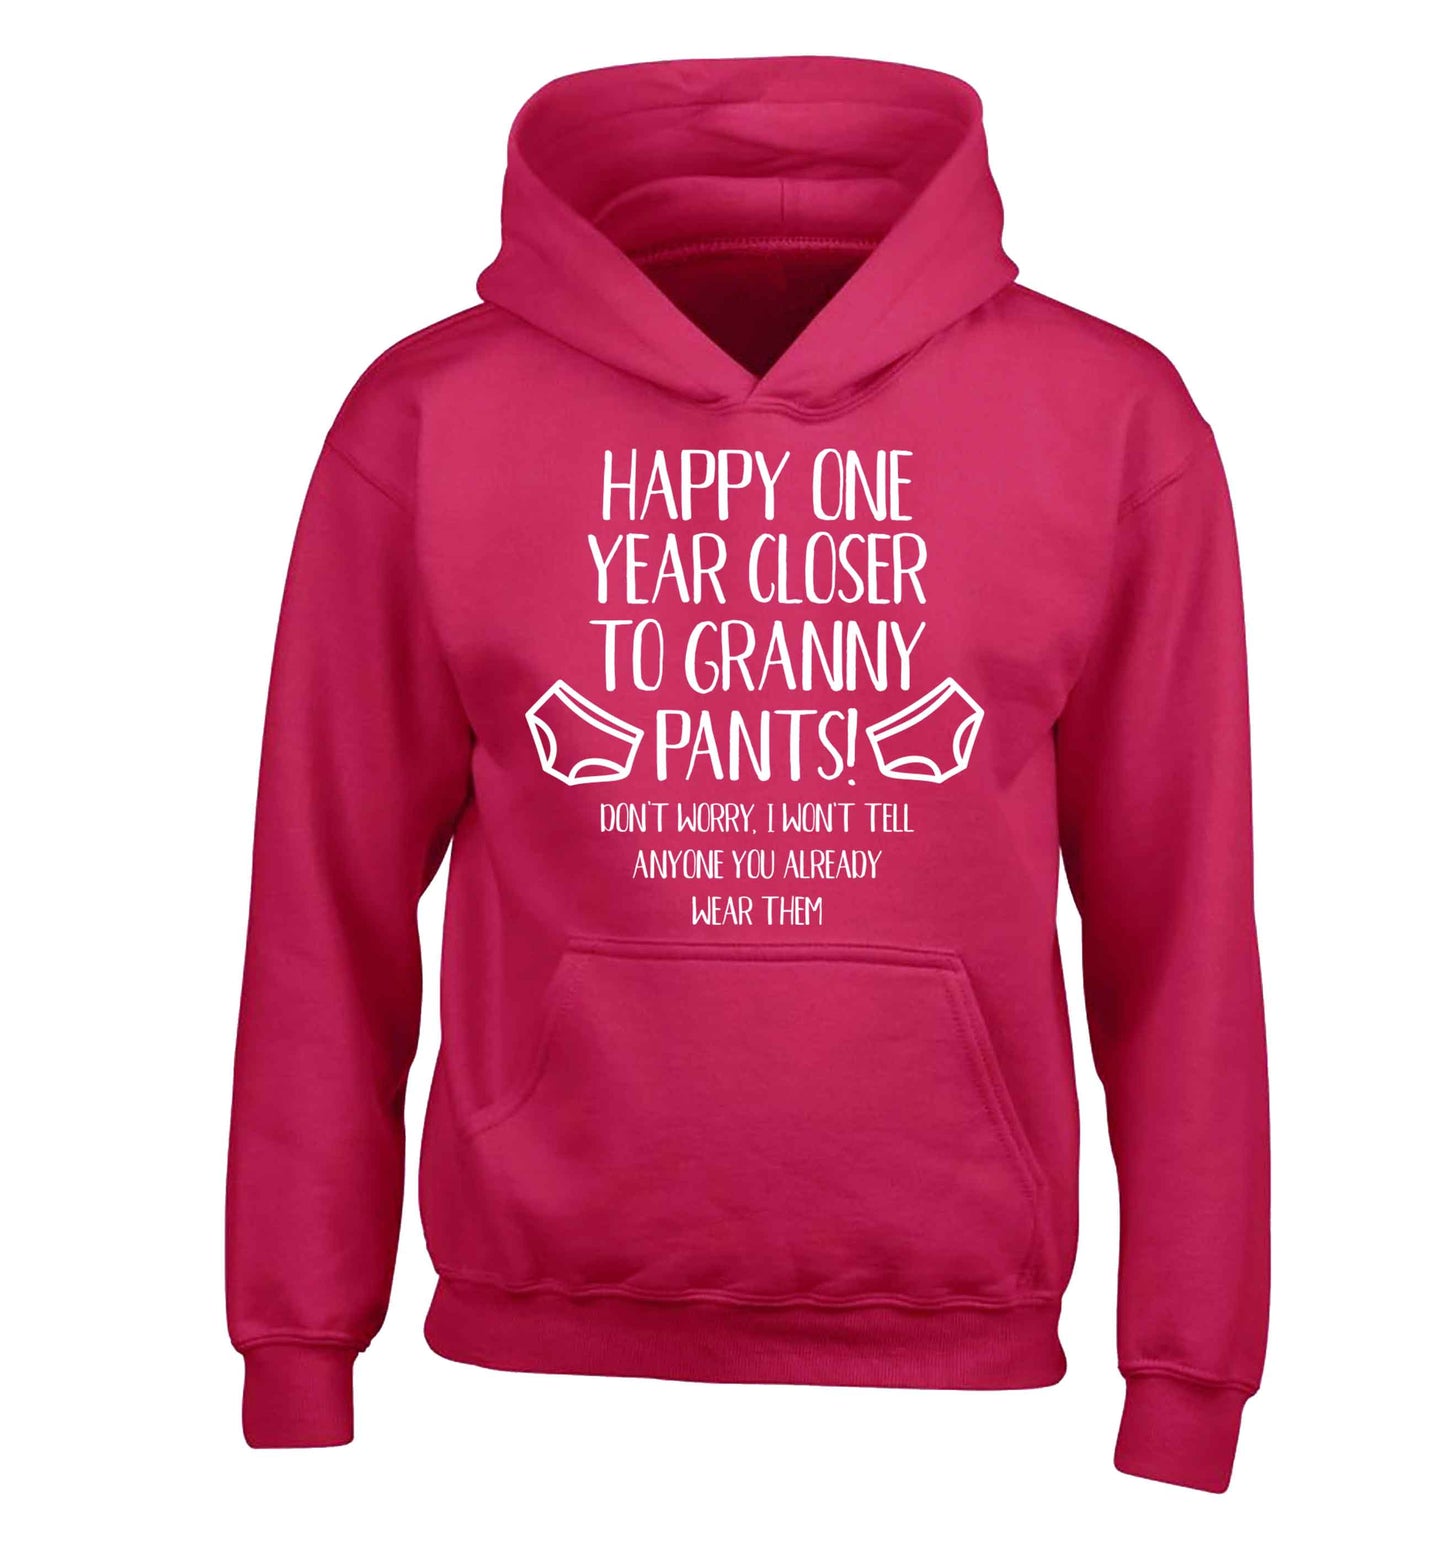 Happy one year closer to granny pants children's pink hoodie 12-13 Years